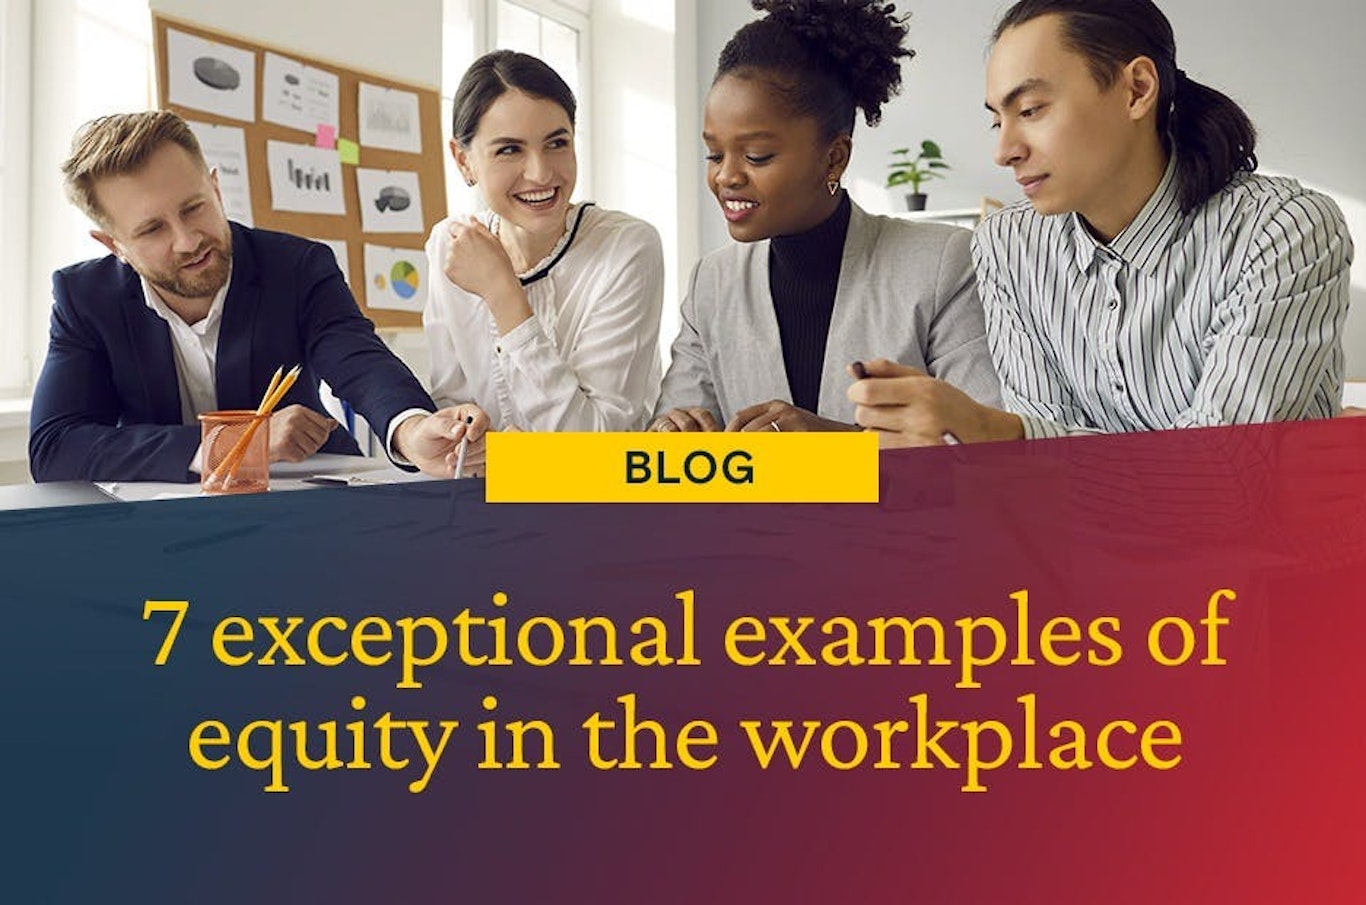 equity in the workplace header image